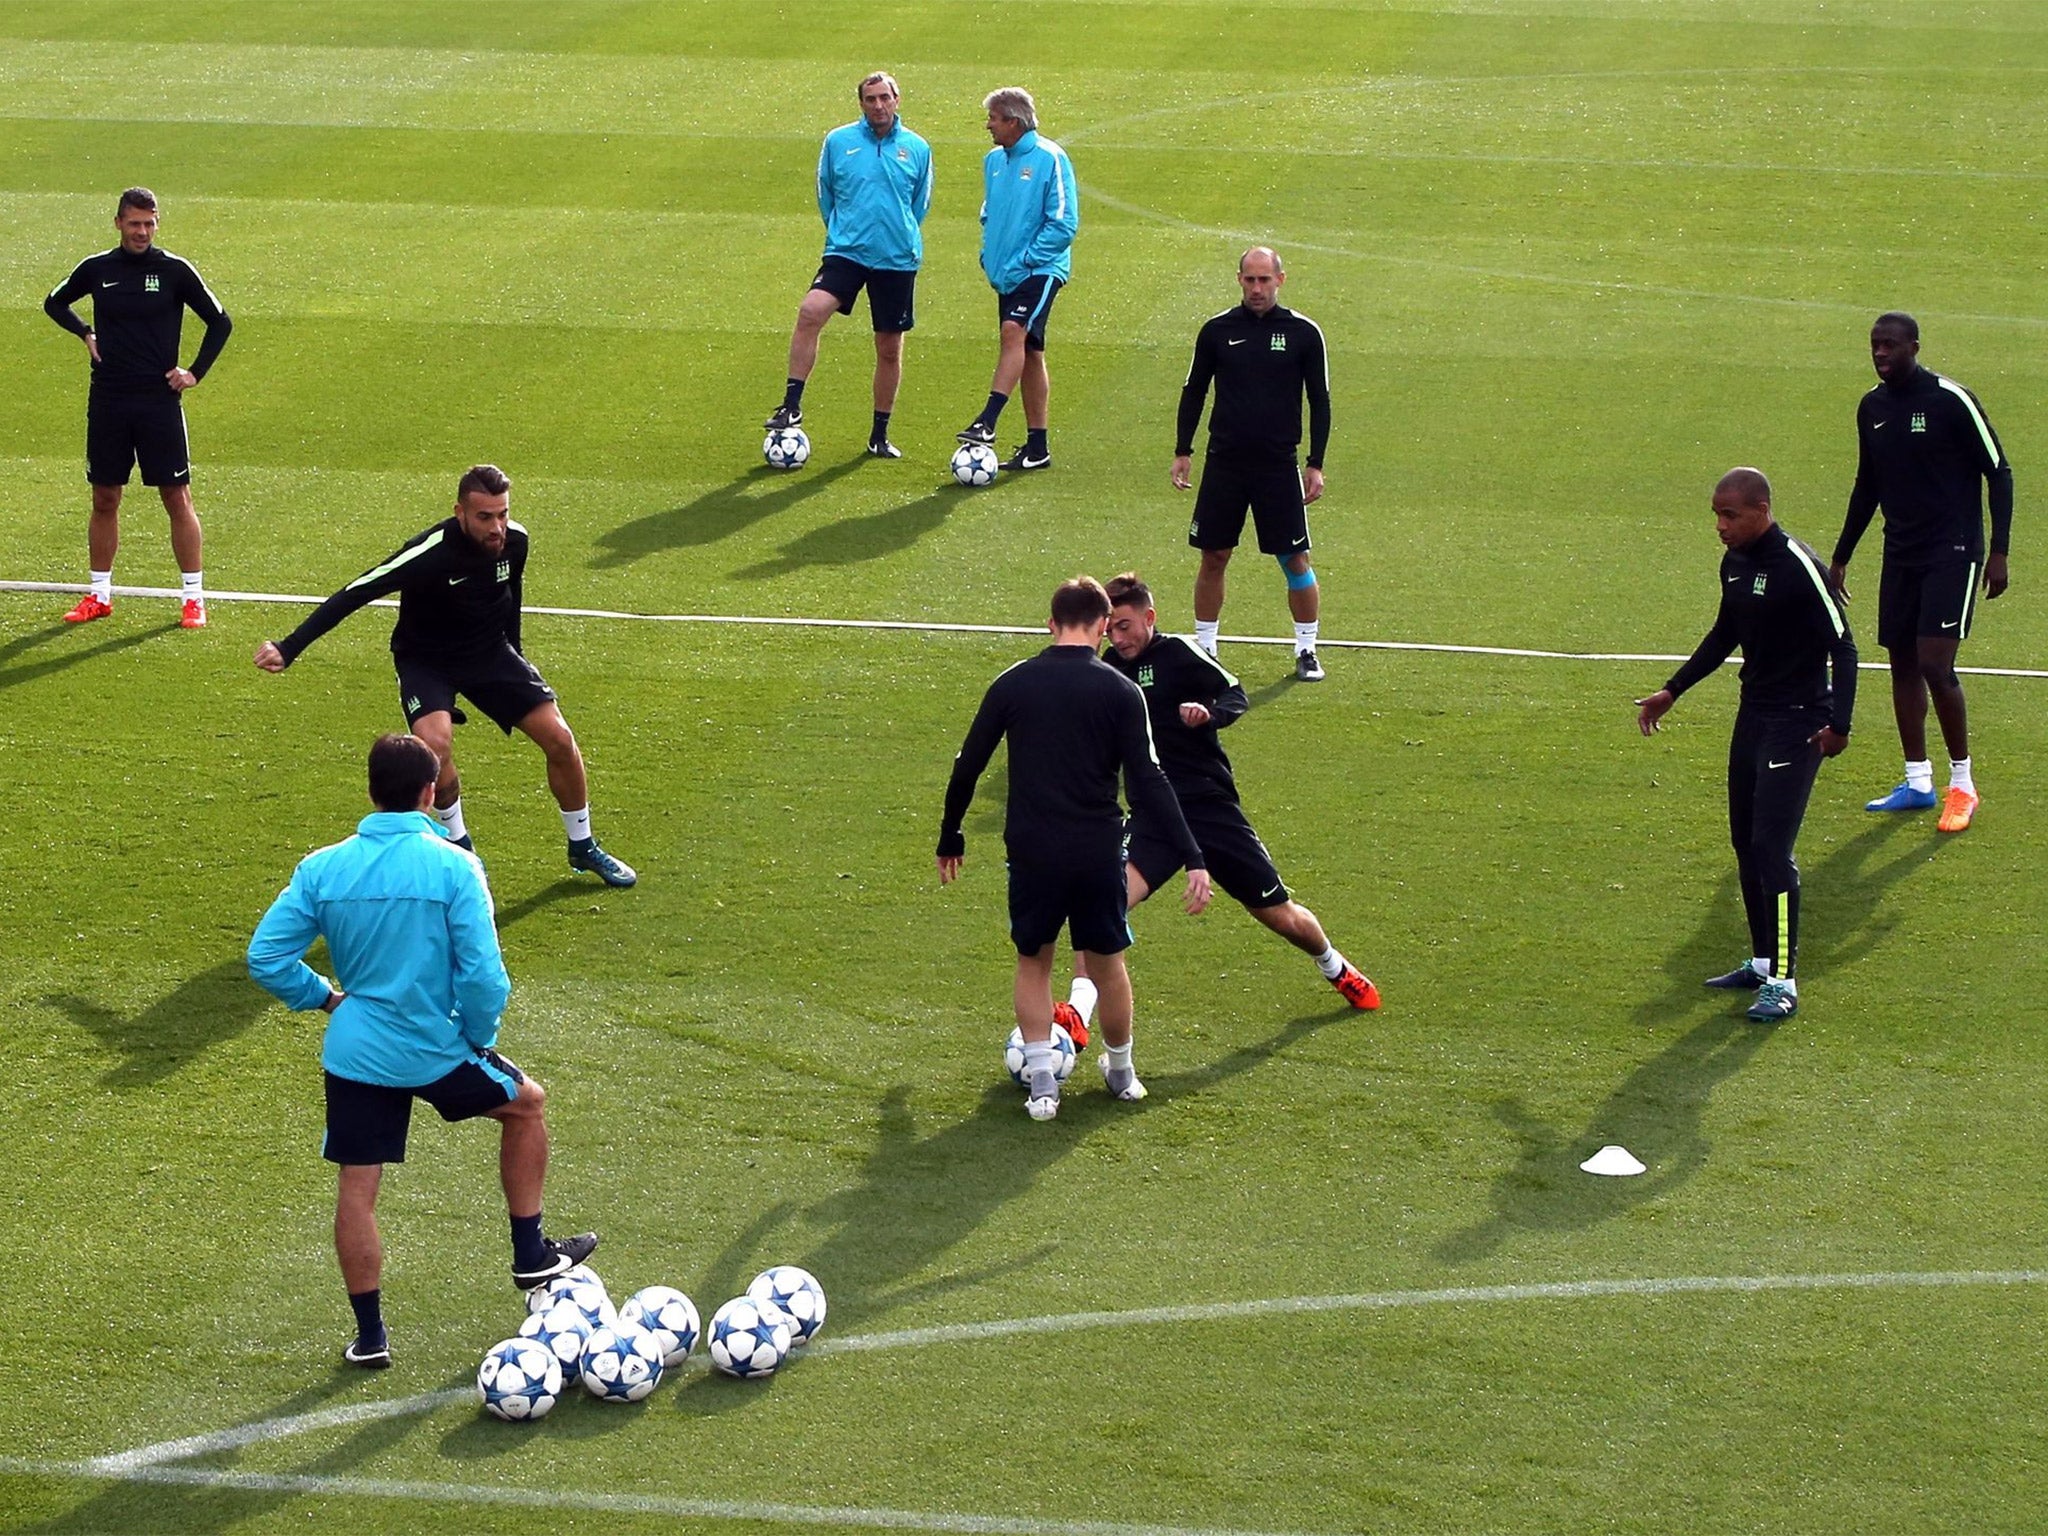 City’s players are put through their paces in training